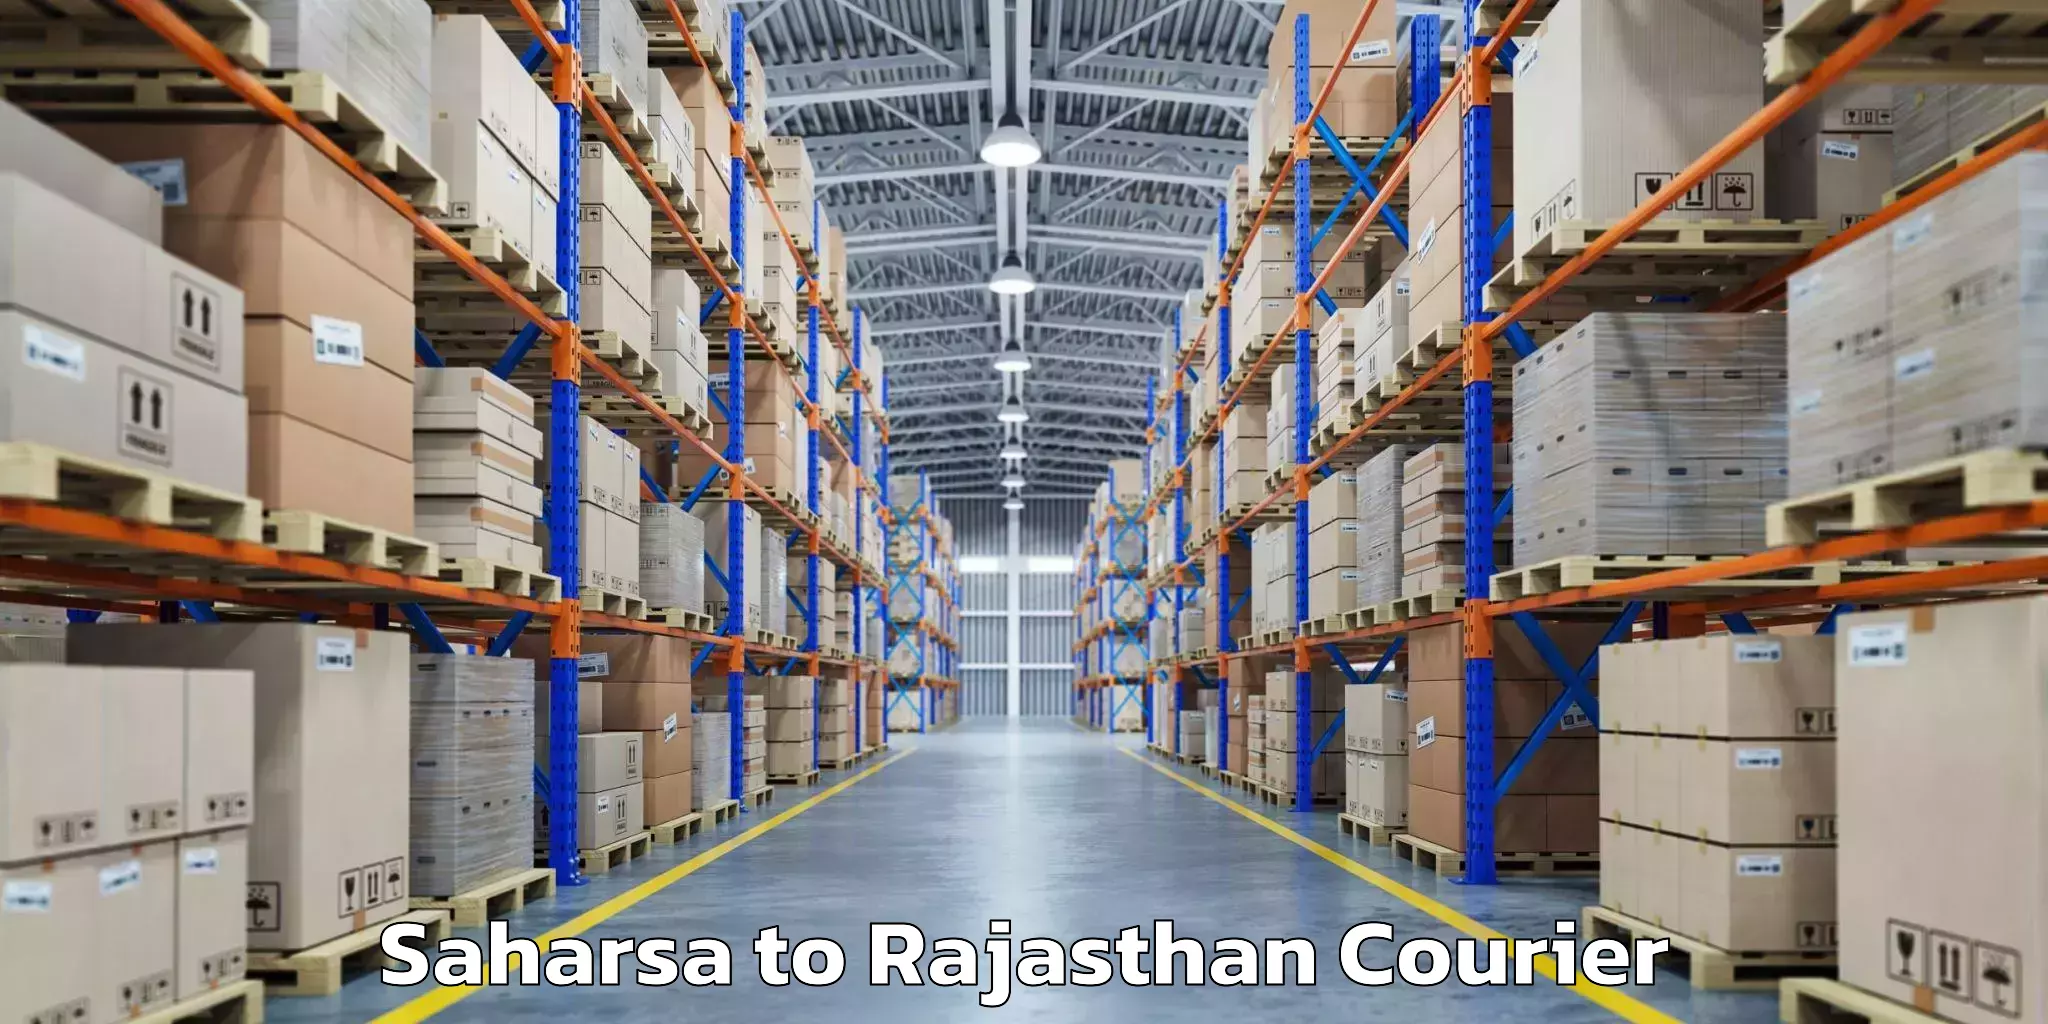 Luggage shipping specialists Saharsa to Rajasthan